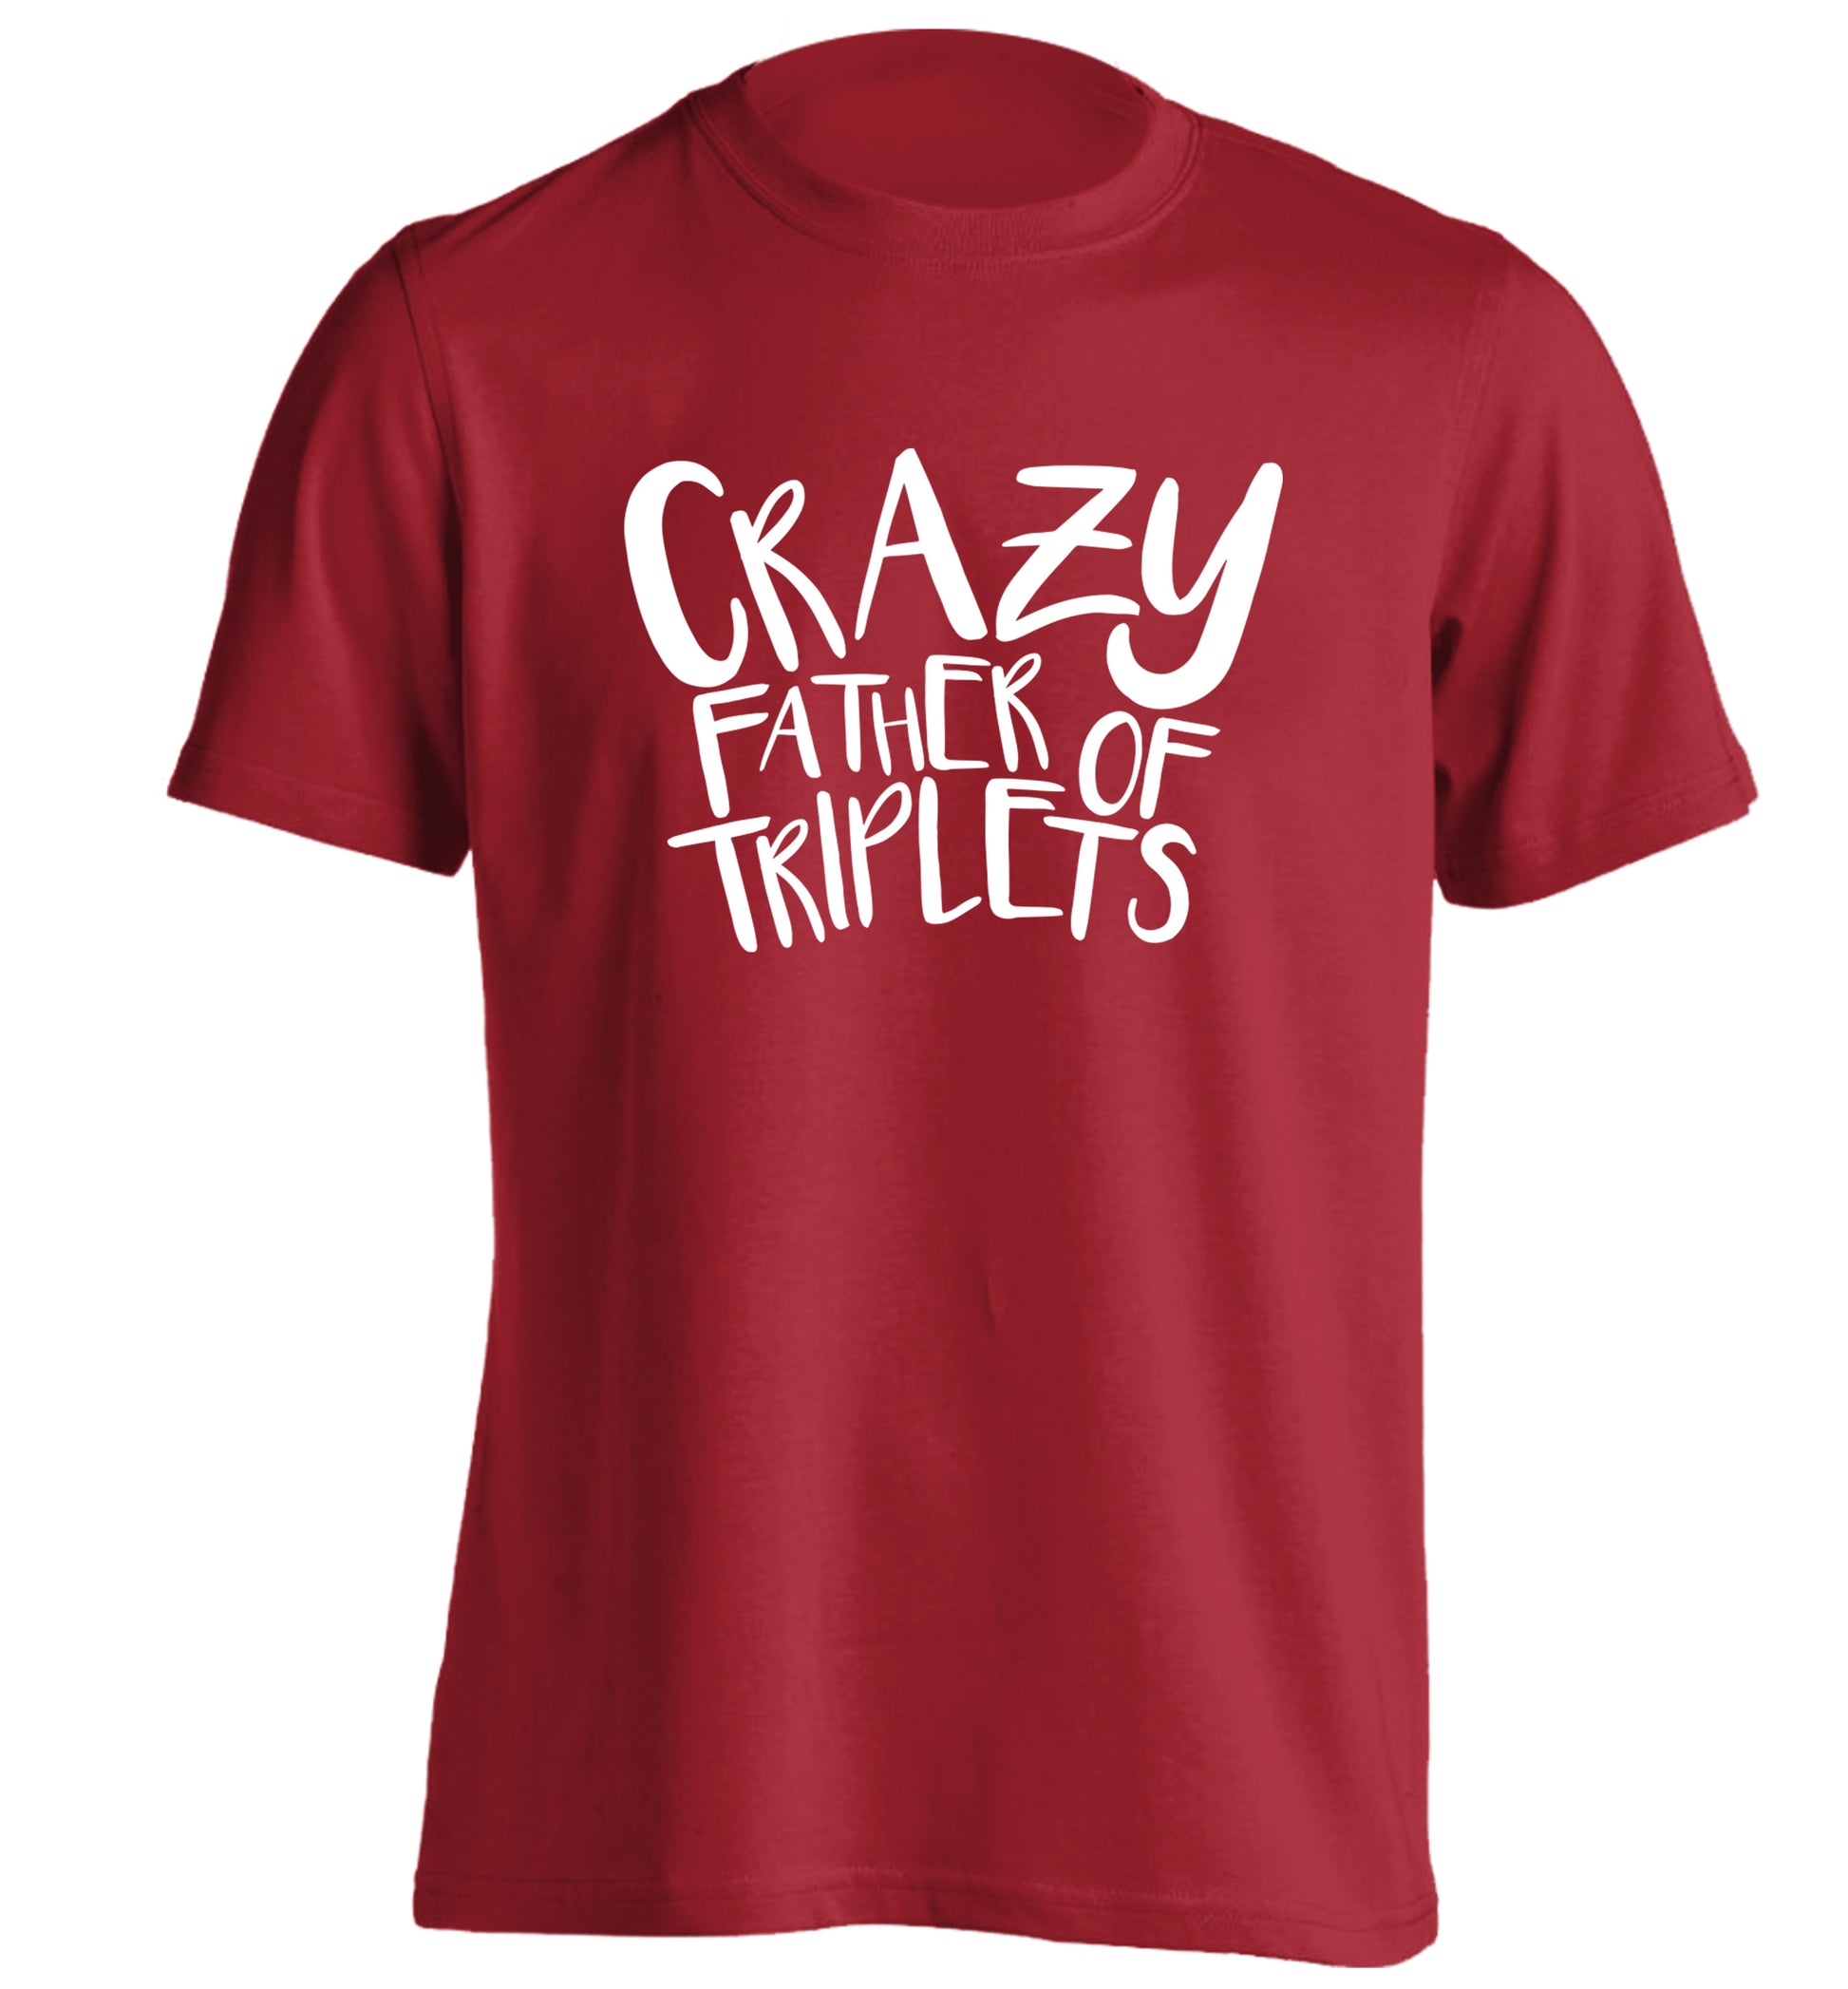 Crazy father of triplets adults unisex red Tshirt 2XL